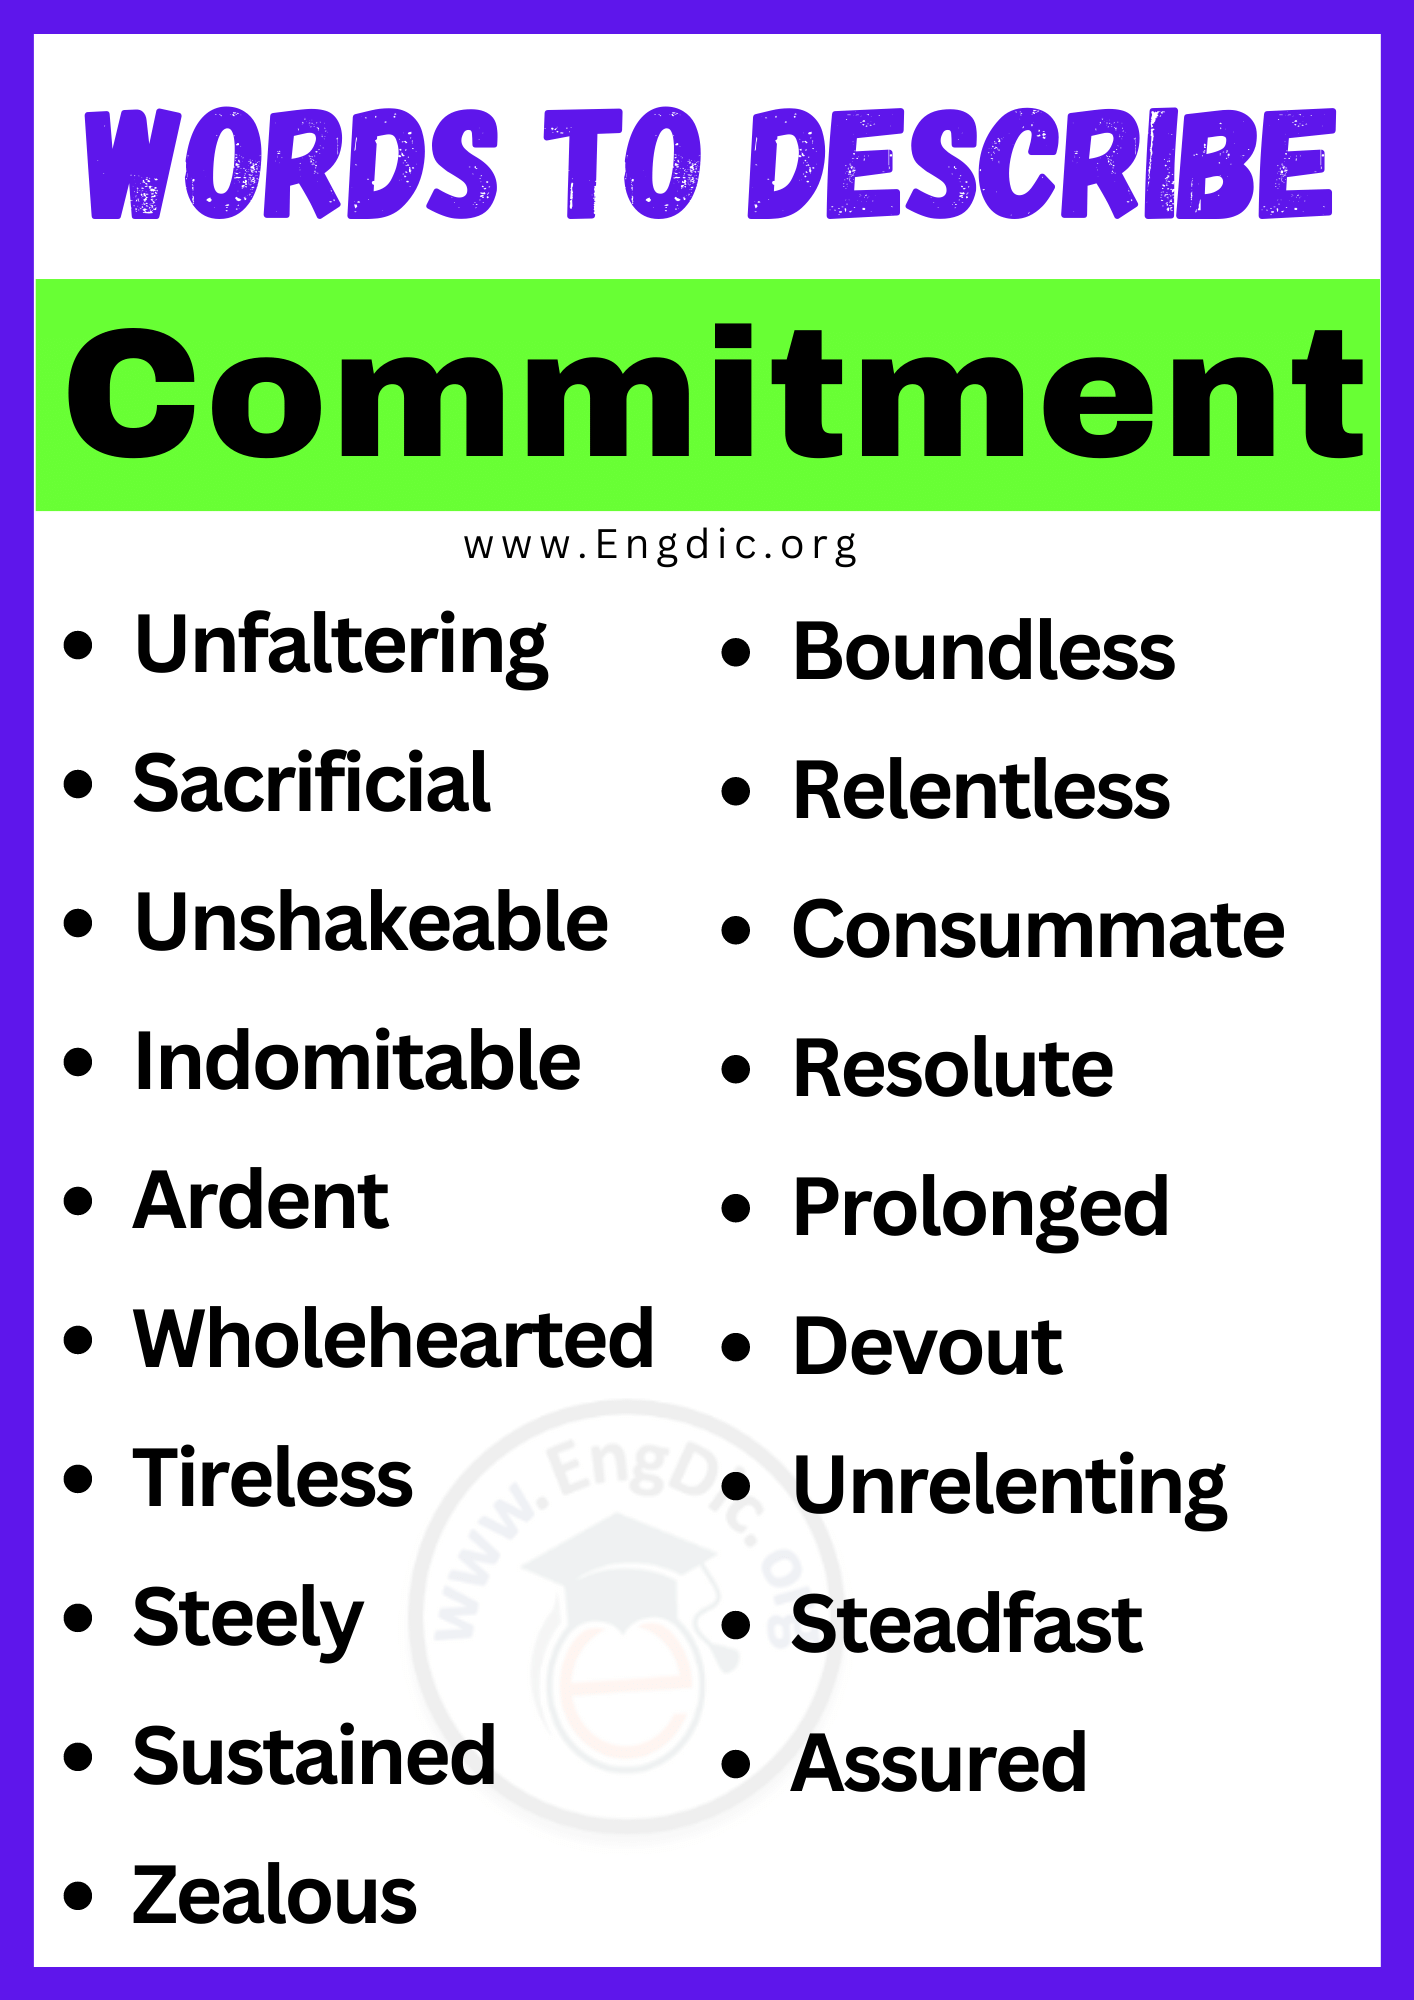 Words to Describe Commitment